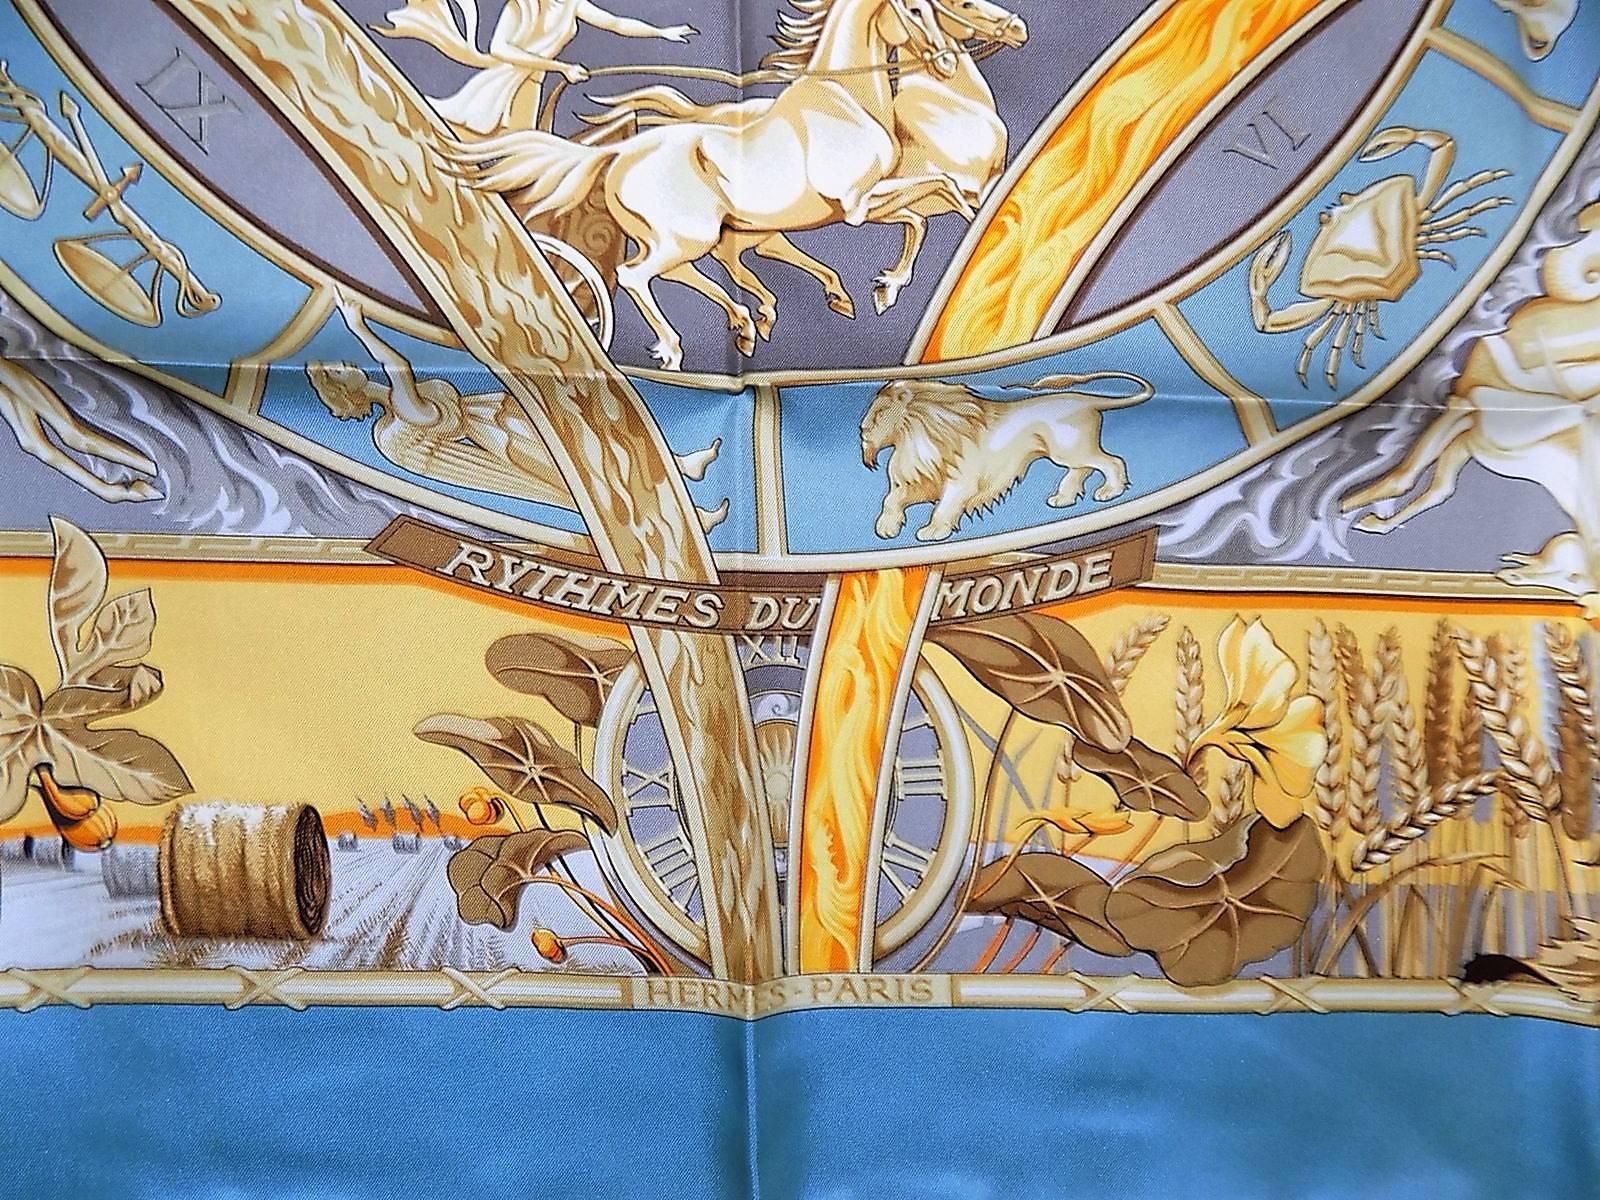 HERMES  Scarf Rythmes du Monde by Laurence Bourthoumieux.  3